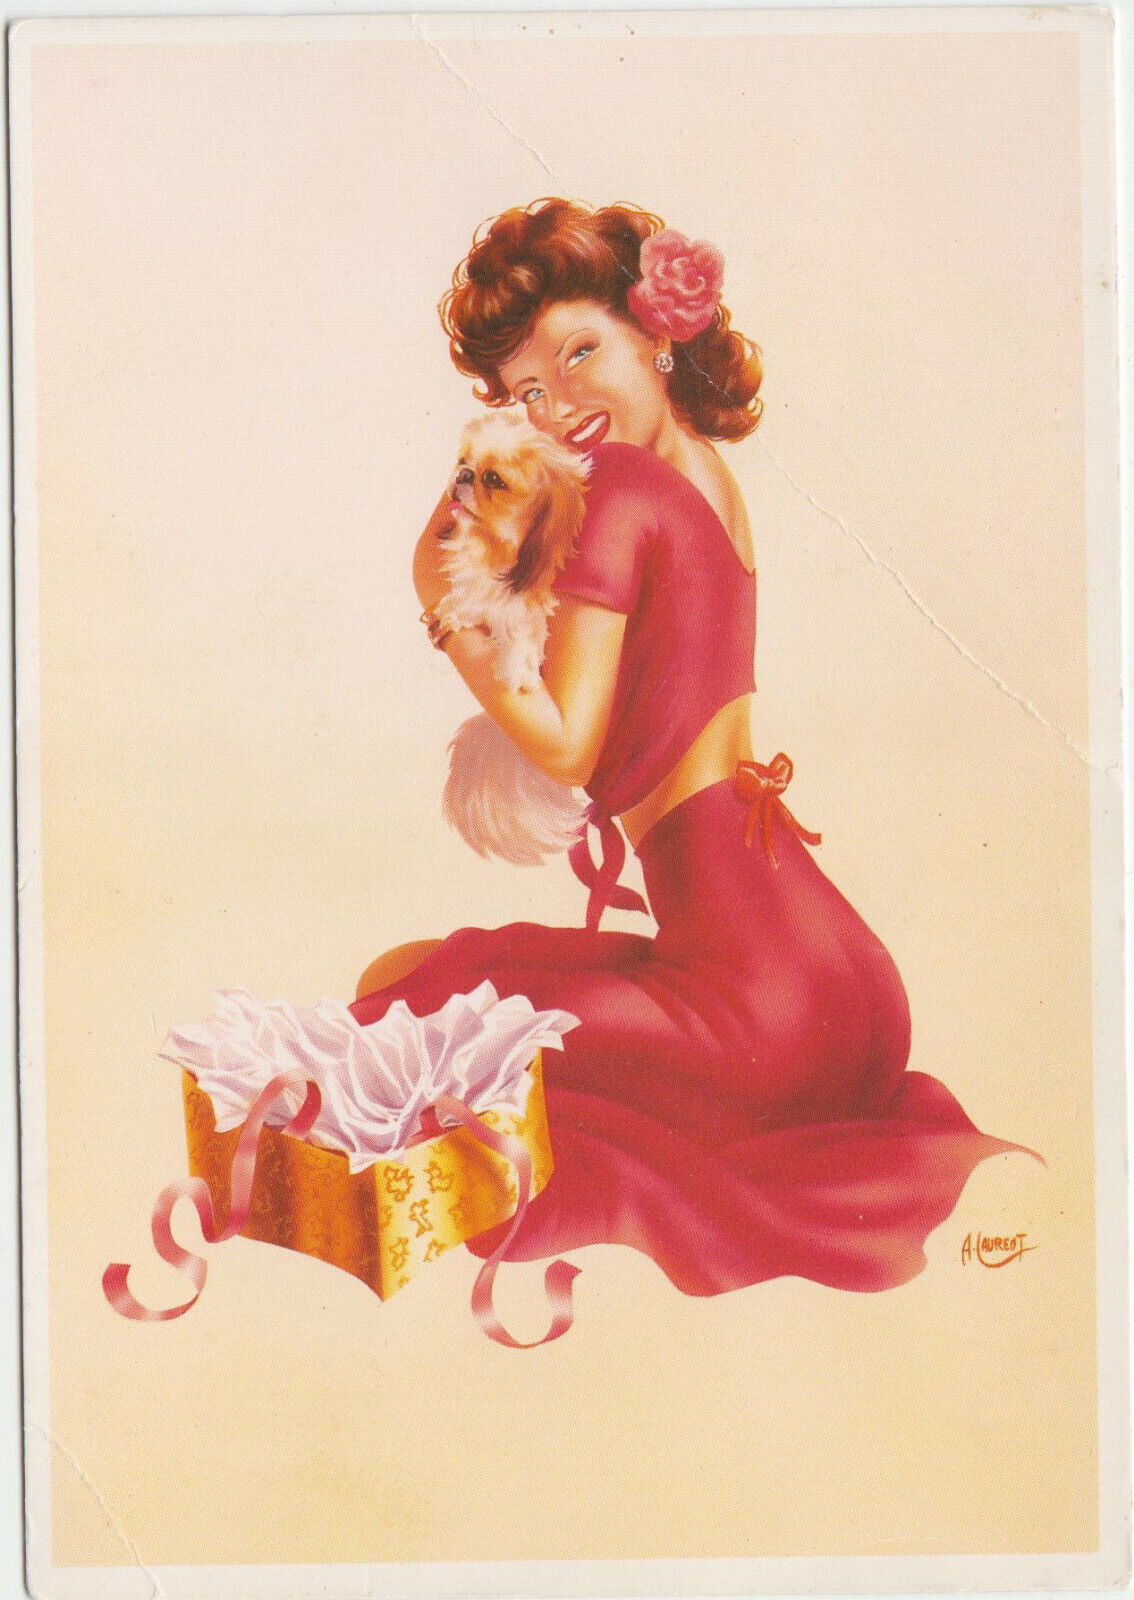 CARTE POSTALE MODERNE PIN UP NEW YORK CARDS MRC SOLLY A LAURENT HUILE CHIEN 401914754437